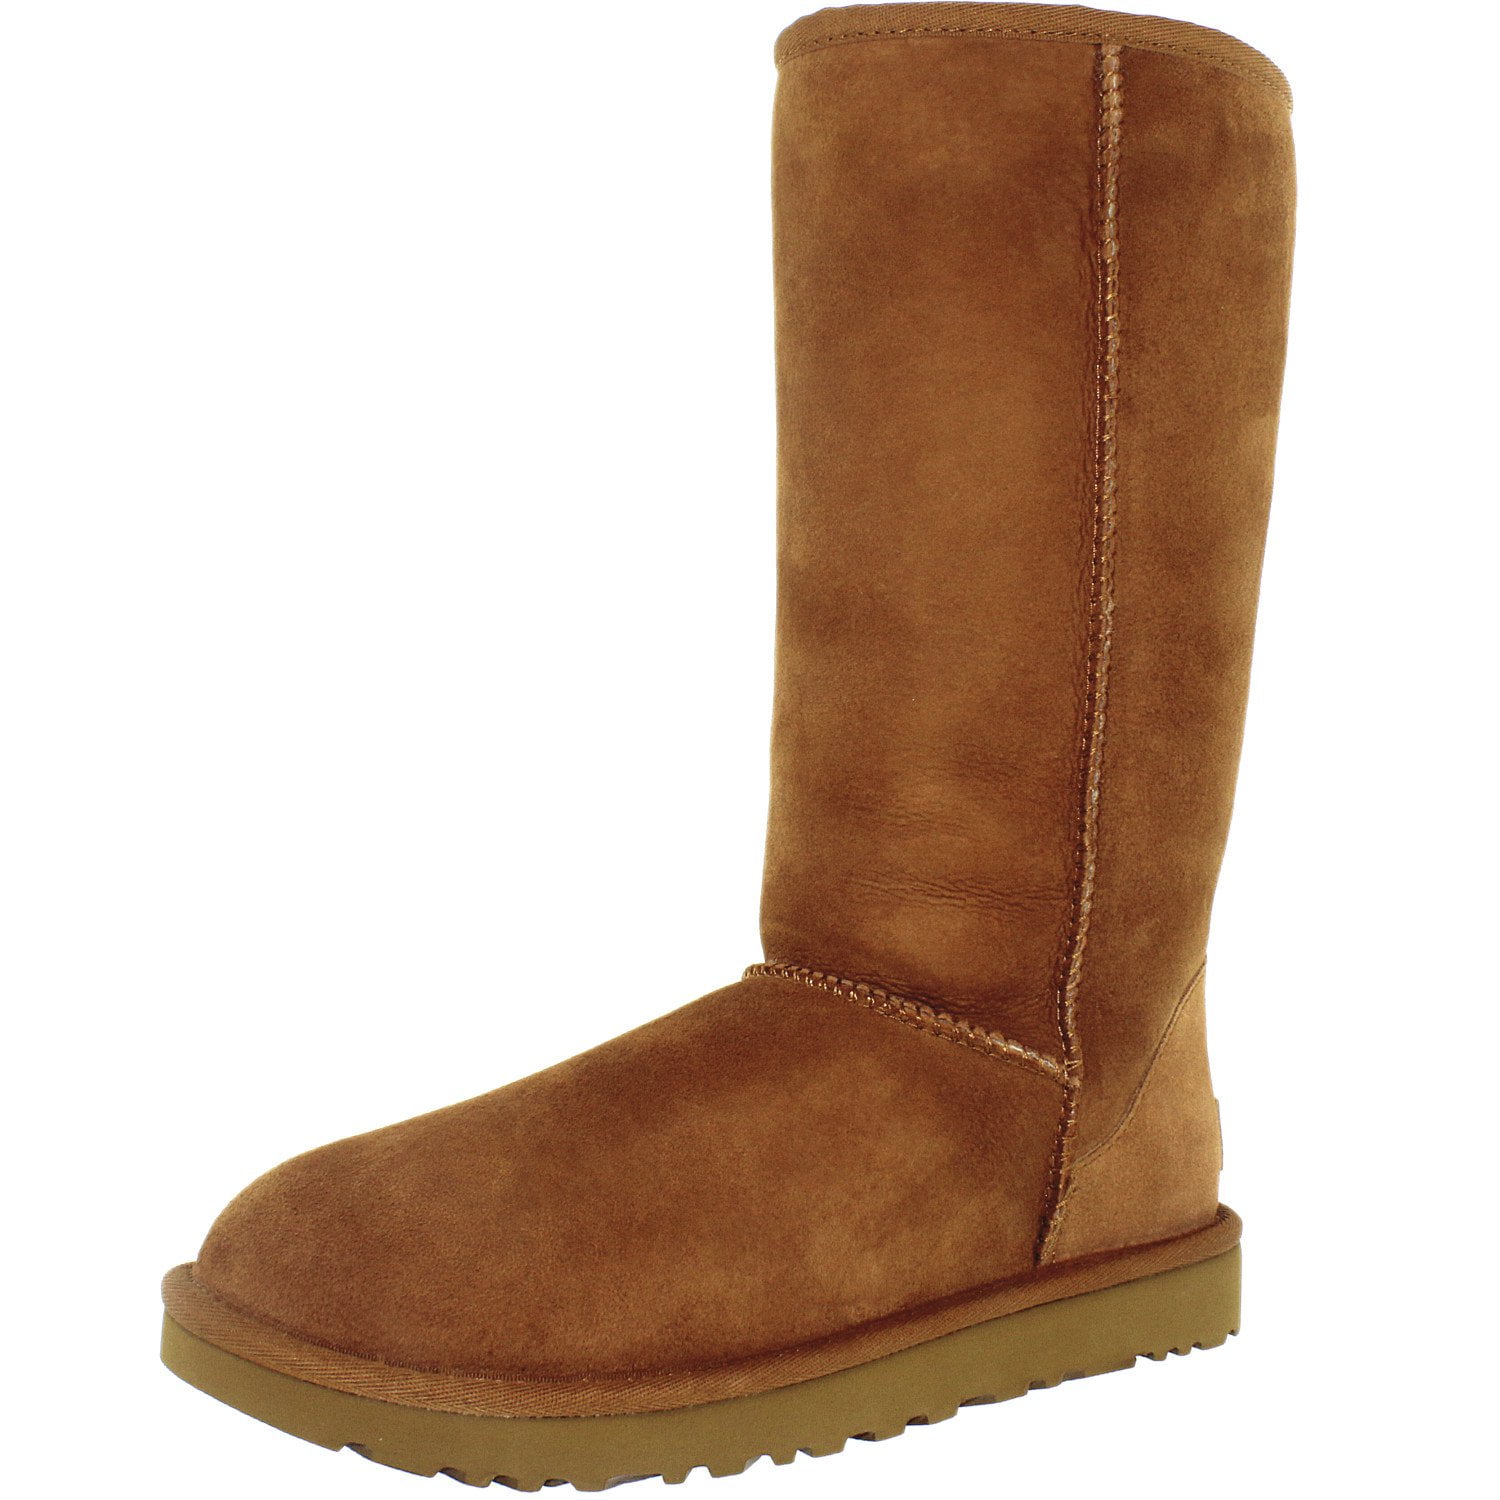 Classic Tall II Mid-Calf Suede Boot 